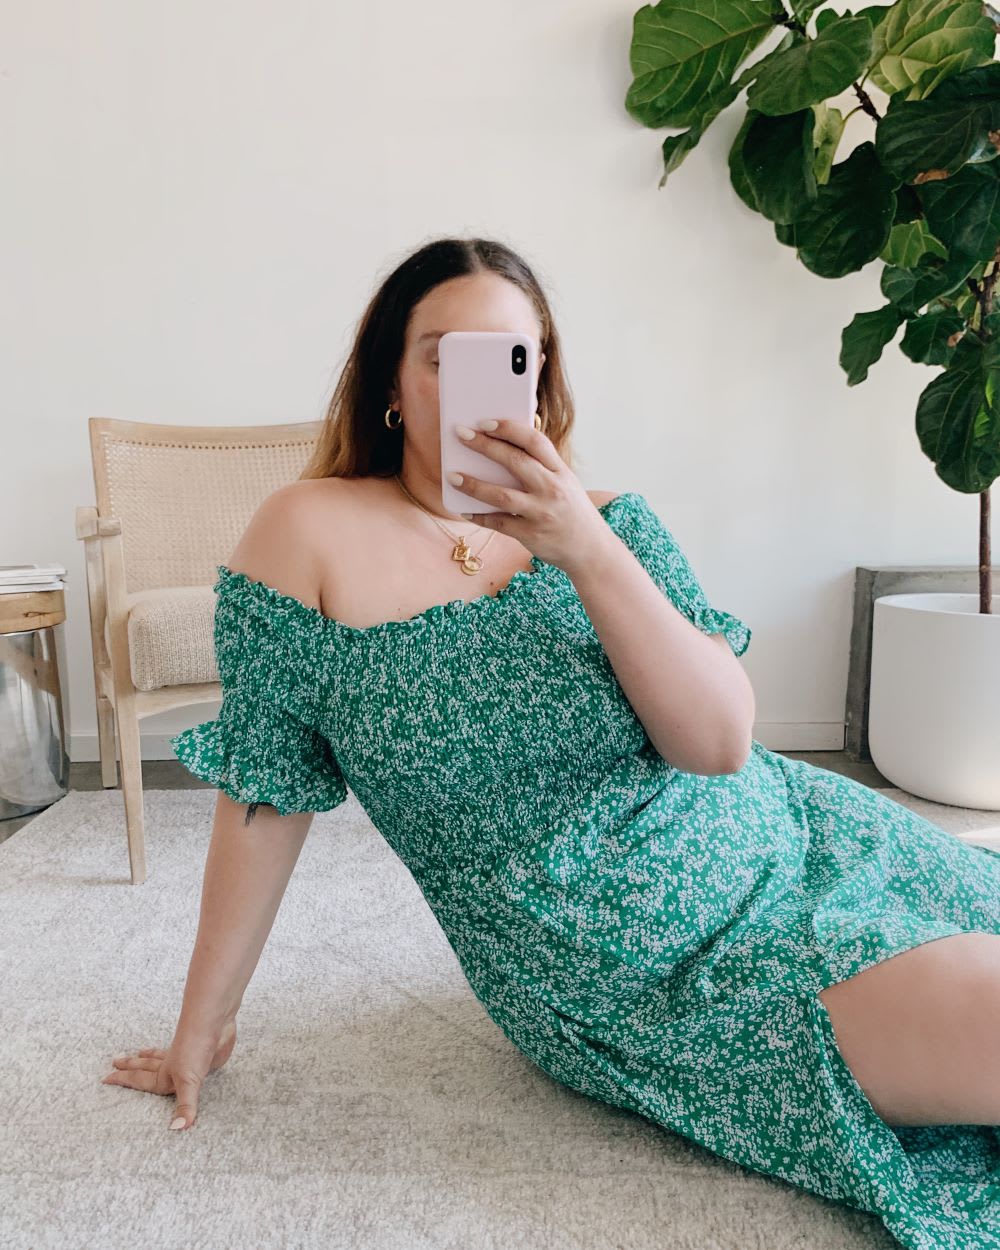 Women's Smocked Dresses, Tops, and More: The Ultimate Summer Trend -  Lulus.com Fashion Blog